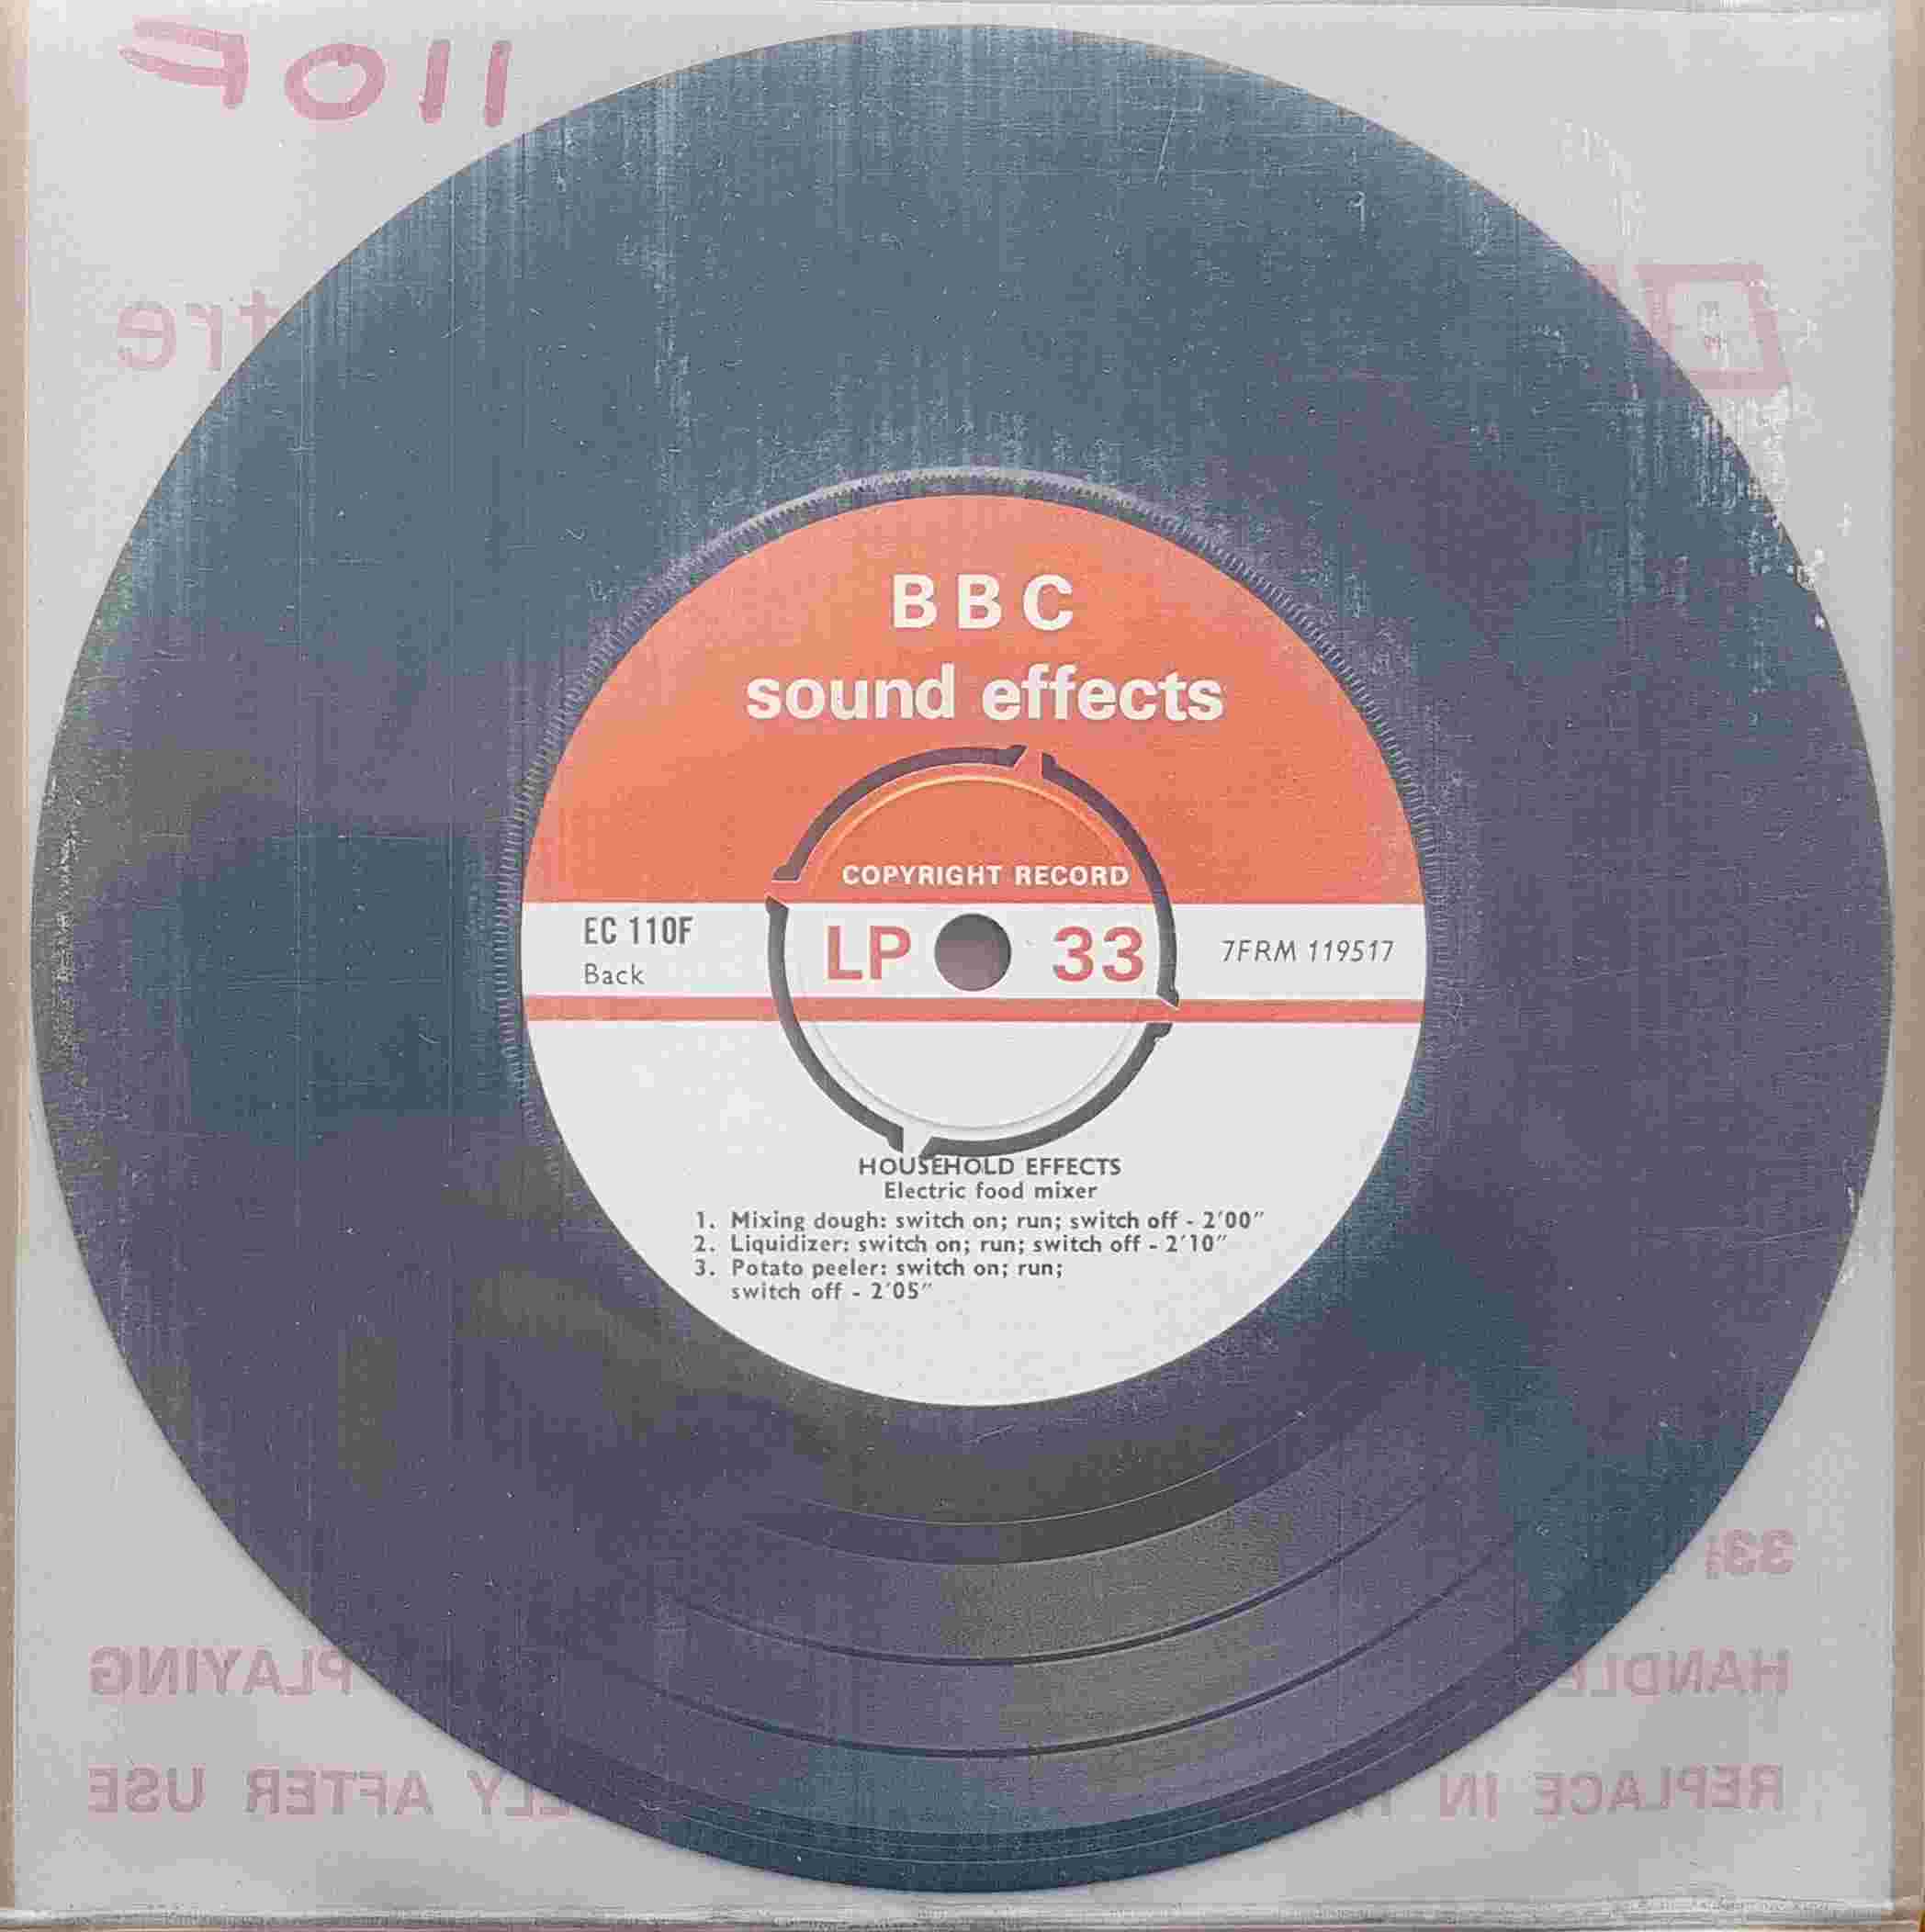 Picture of EC 110F Household effects: Electric food mixer by artist Not registered from the BBC records and Tapes library